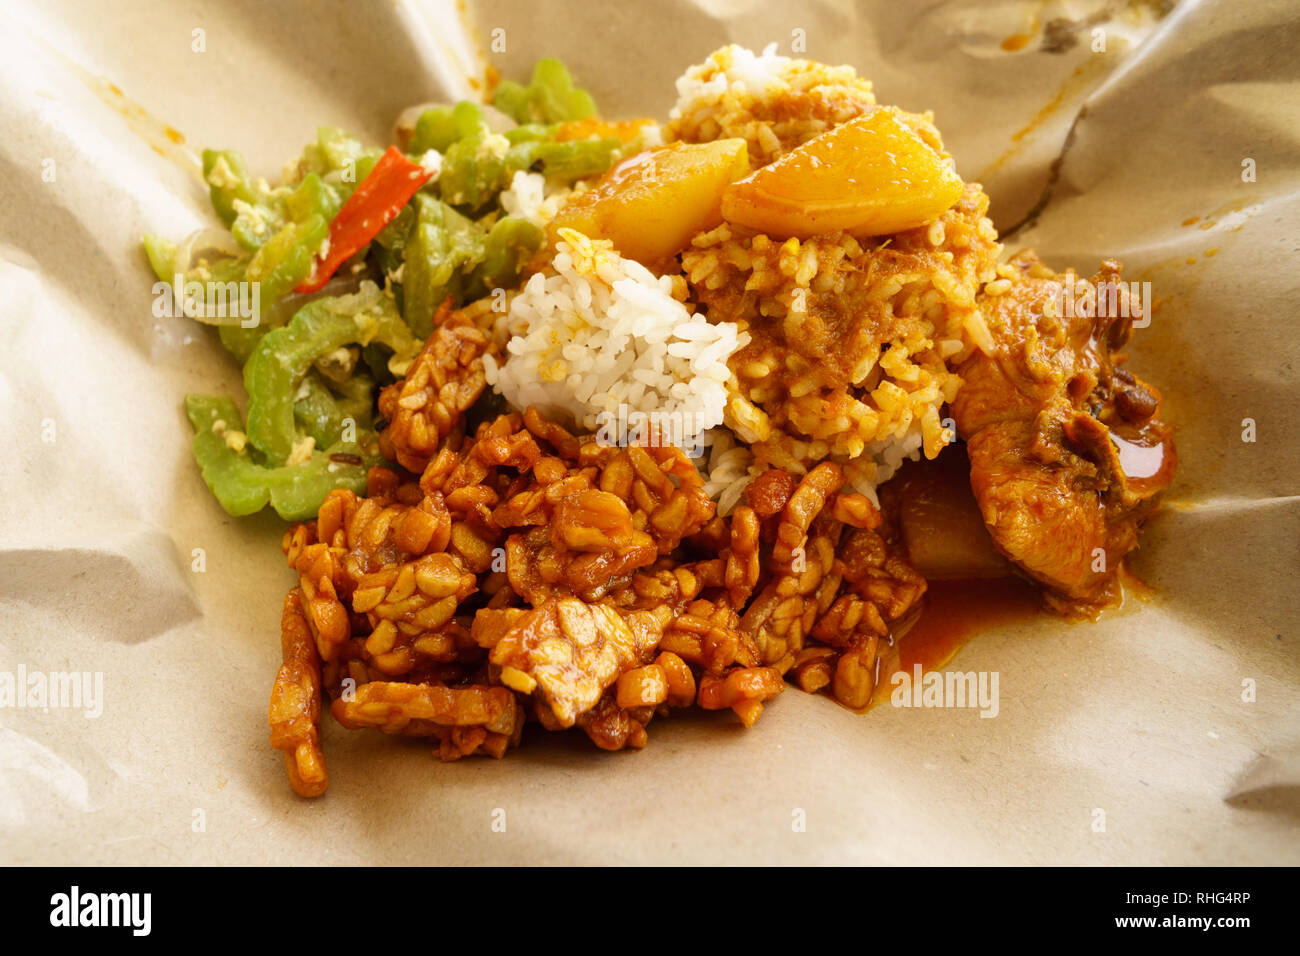 Typical Malaysian daily lunch called Nasi Campur or Nasi Bungkus which is loosely translated as rice mixed with vegetable, tempe, chicken or fish. Stock Photo